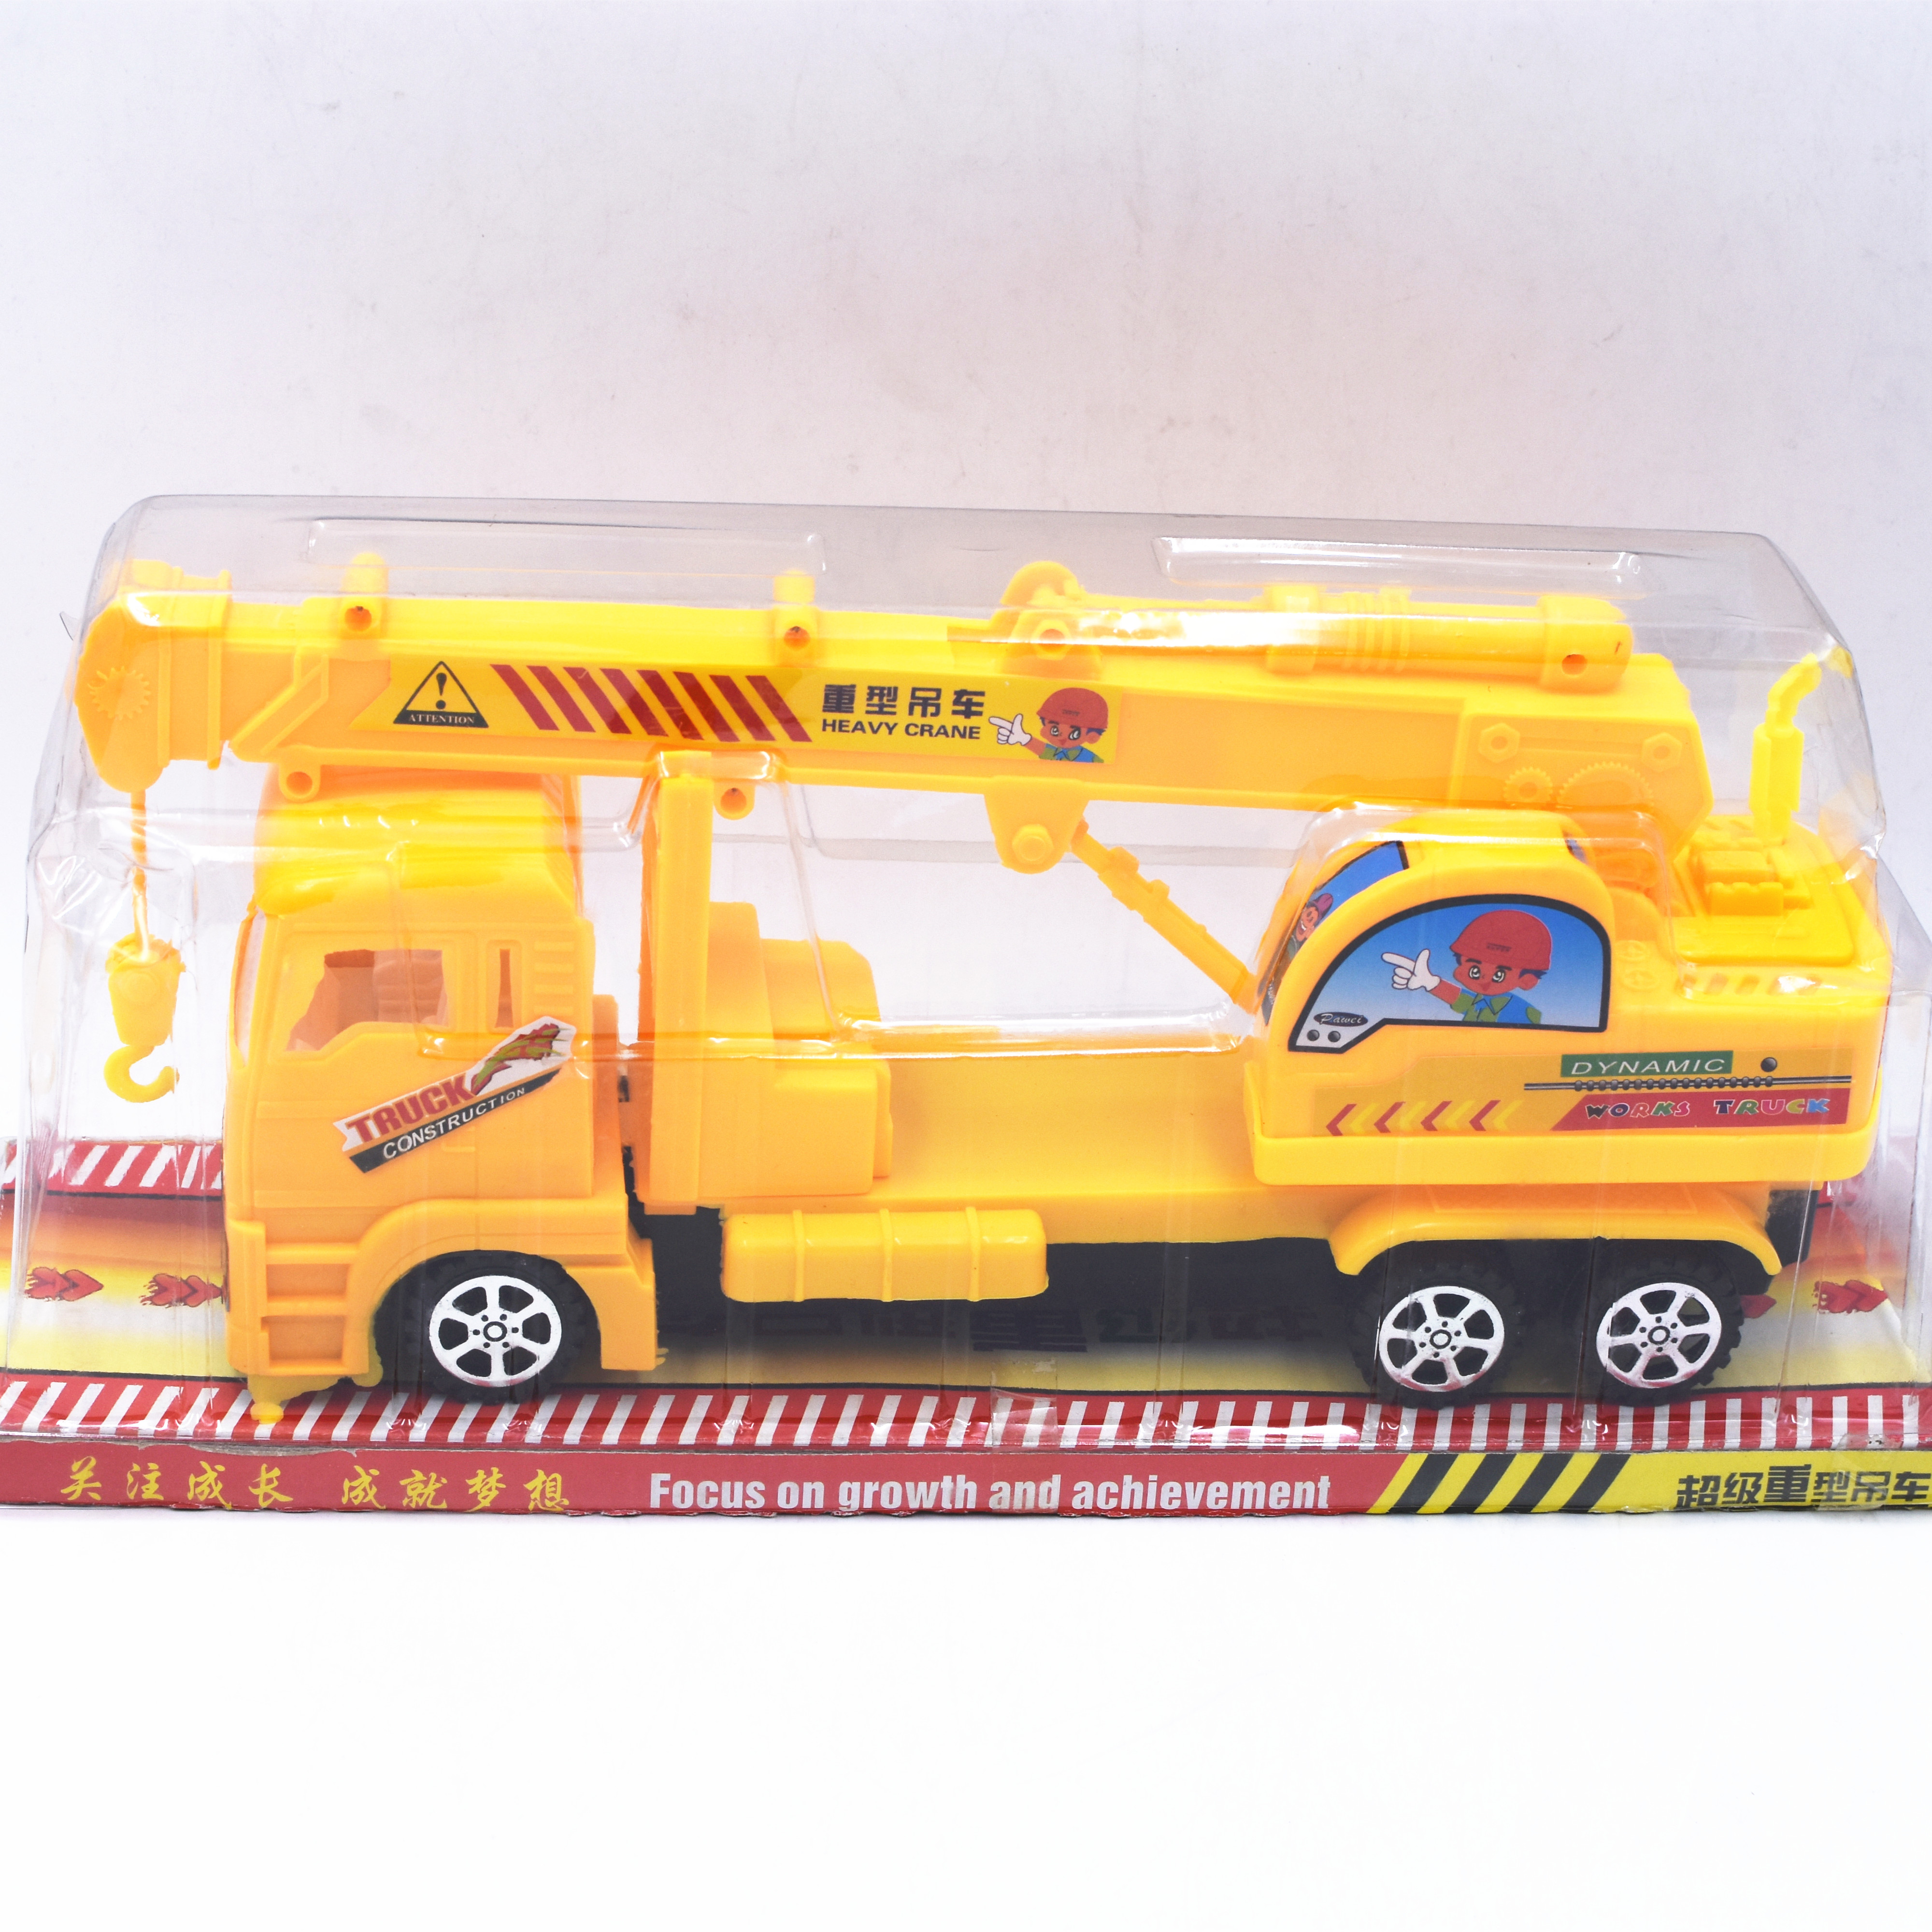 FREE WHEEL TRUCK TOY LY1818